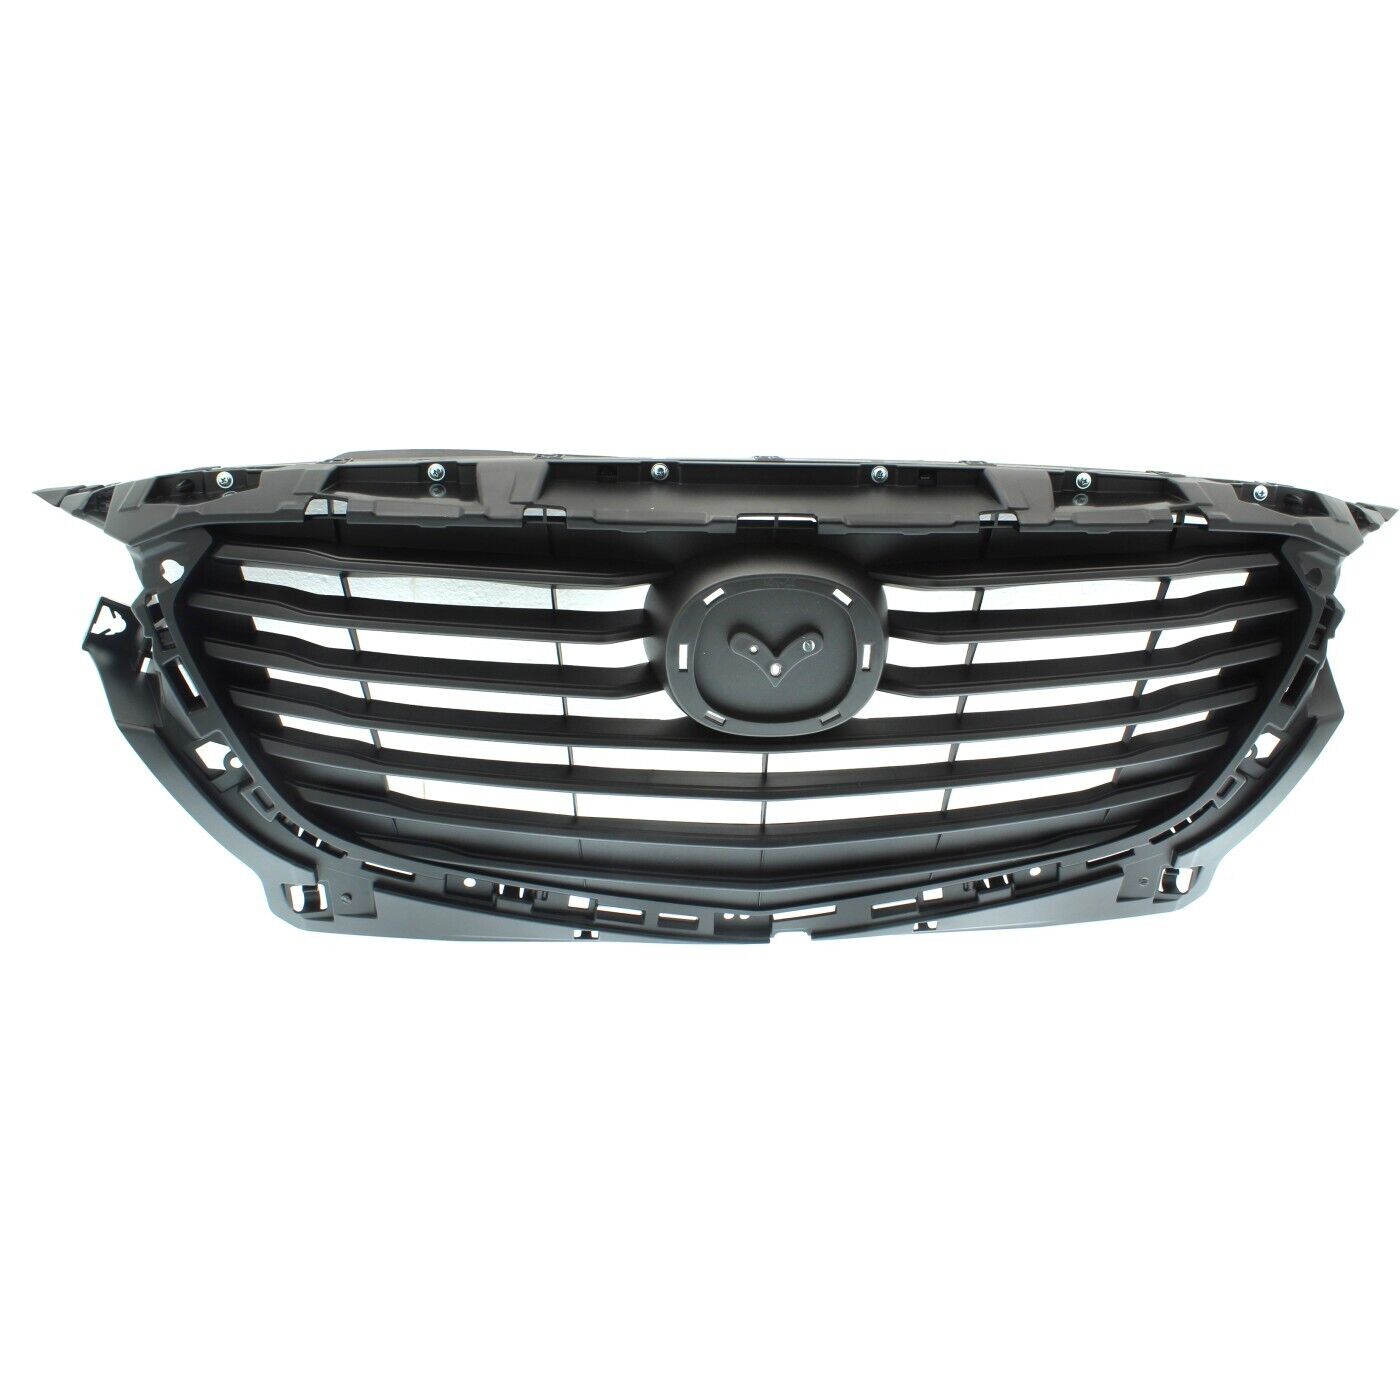 Grille Assembly For 2016-2020 Mazda CX-3 Textured Dark Gray Shell and Insert